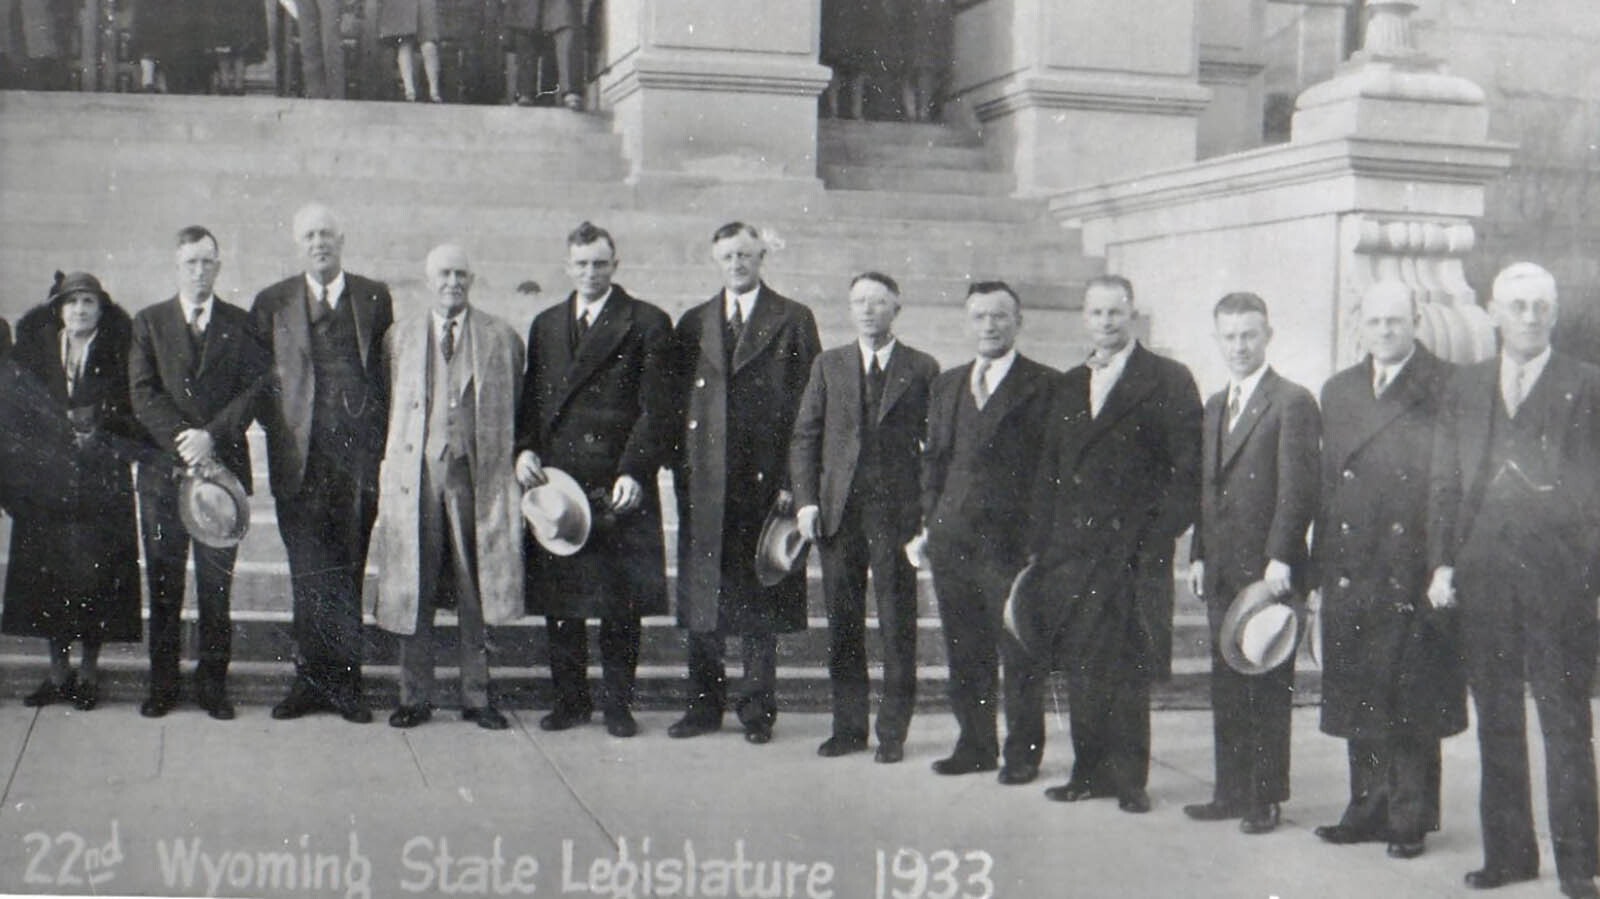 Dora McGrath with the Wyoming Senate of the 22nd Legislature in 1933. Dora was the first woman to serve state Senate.